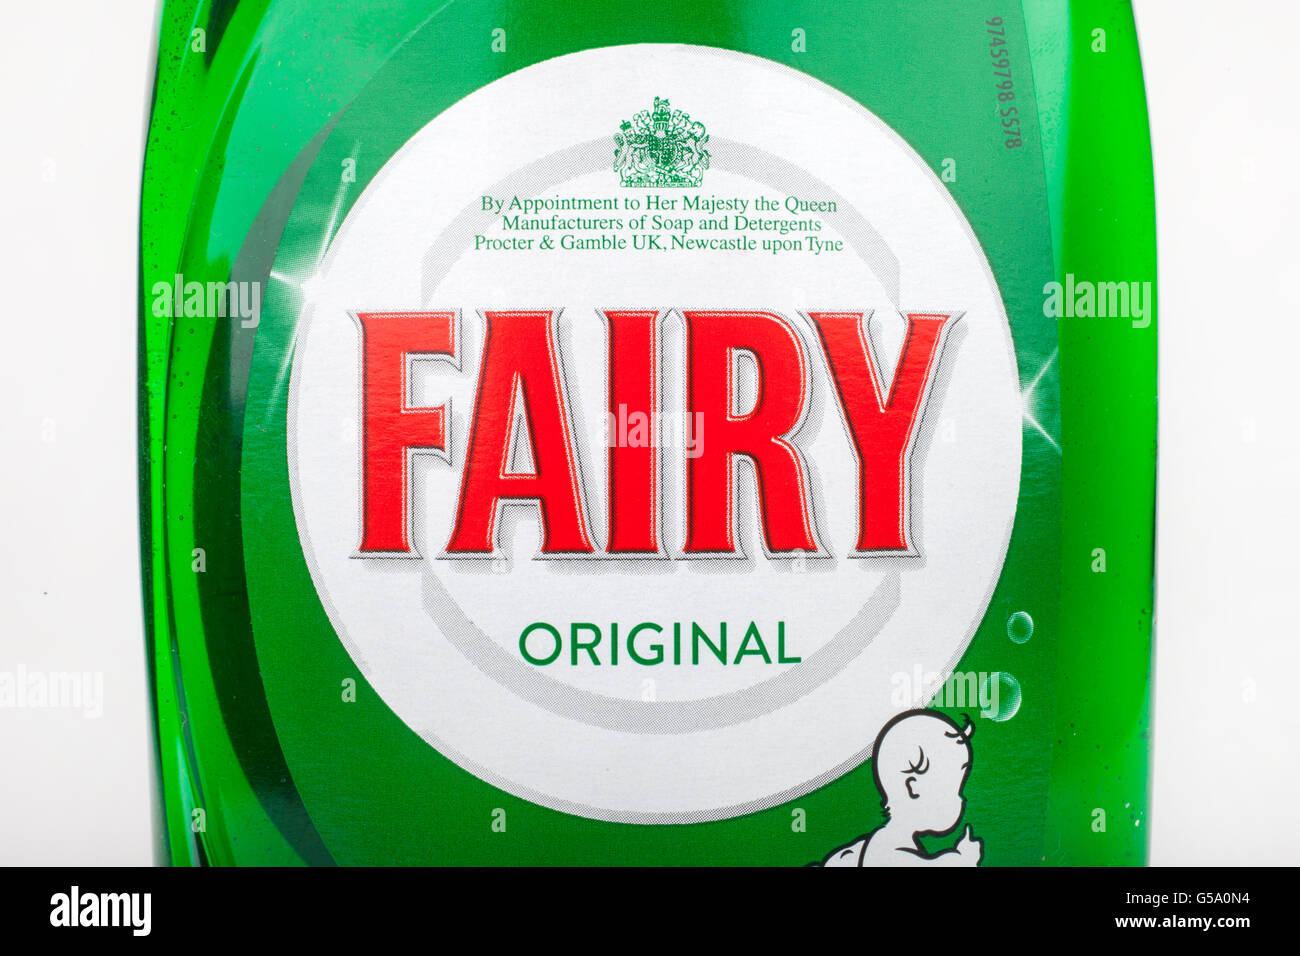 LONDON, UK - JUNE 16TH 2016: A close-up of the logo for original Fairy Liquid over a plain white background, on 16th June 2016. Stock Photo